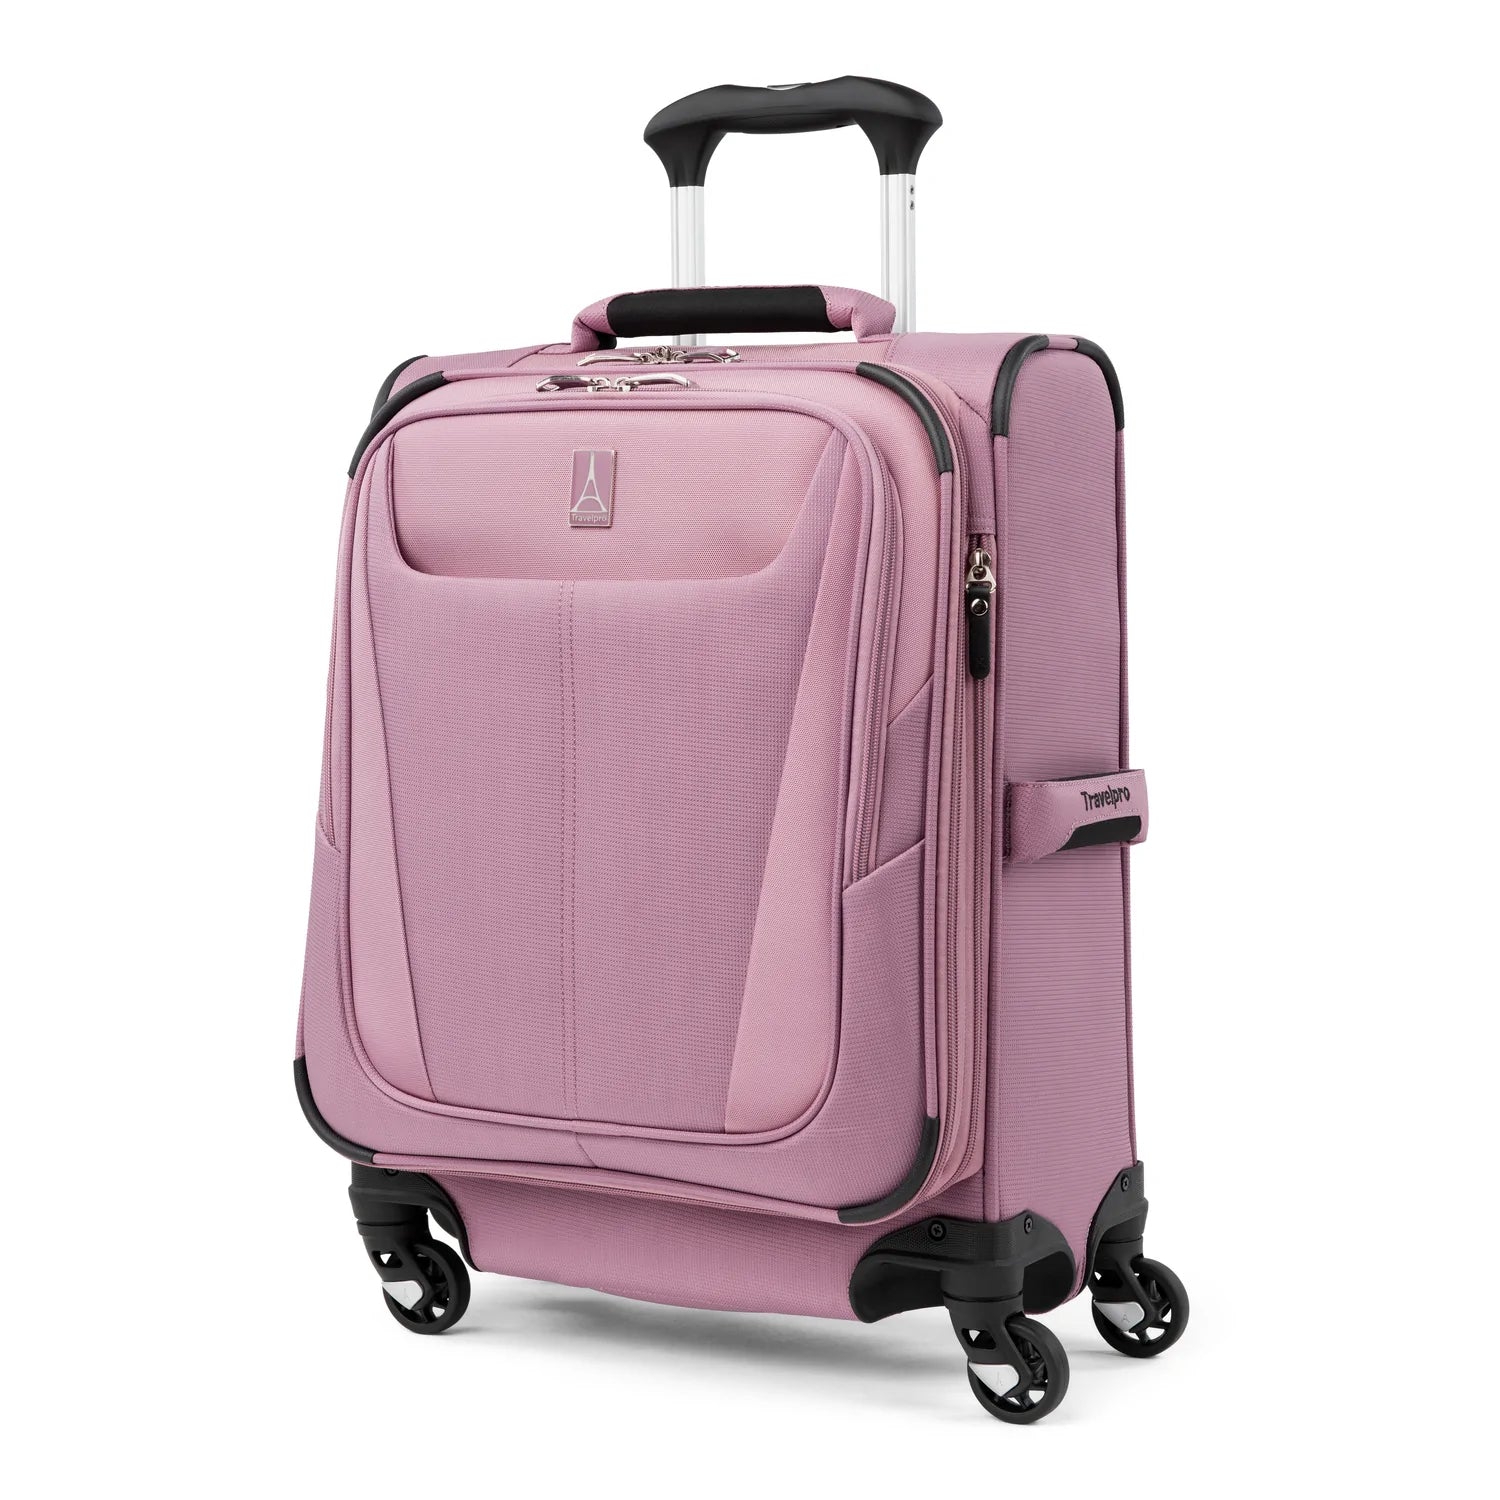 Travelpro Maxlite 5 International Expandable Carry-On Spinner